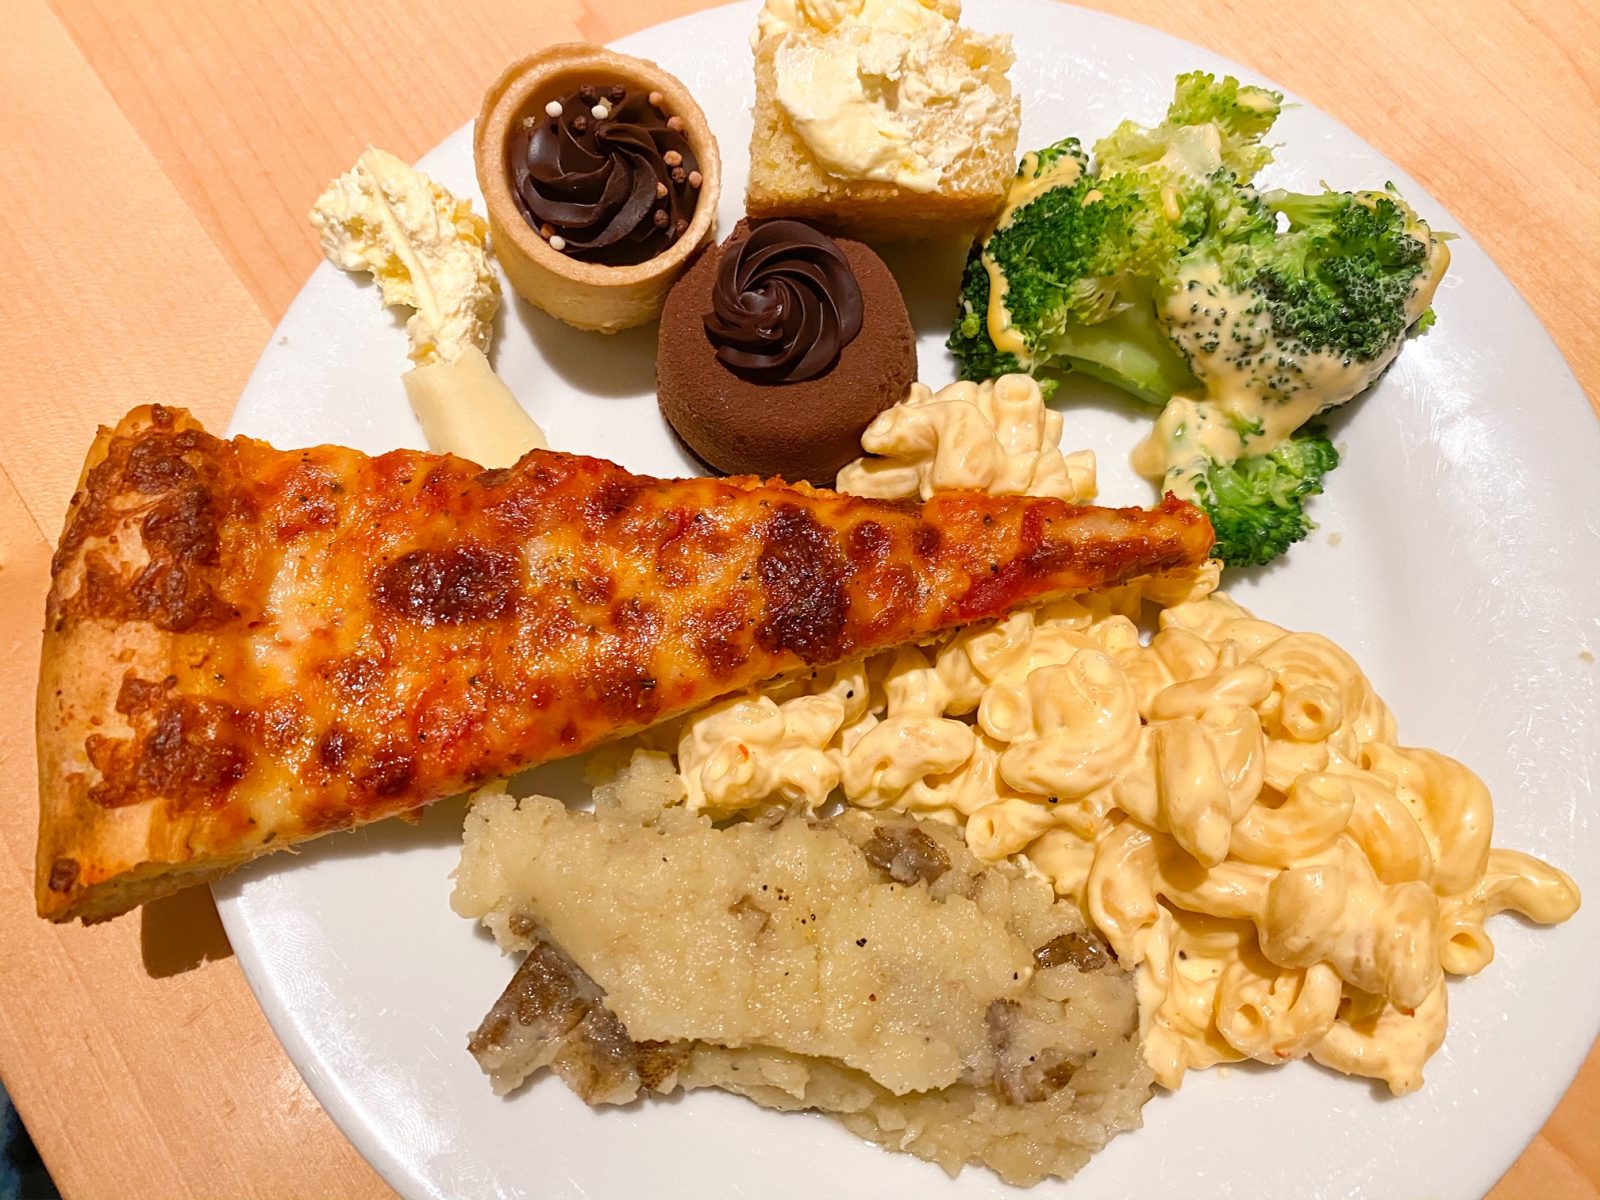 buffet plate with pizza, Mac and cheese, vegetable and dessert at Disney dining plan restaurant